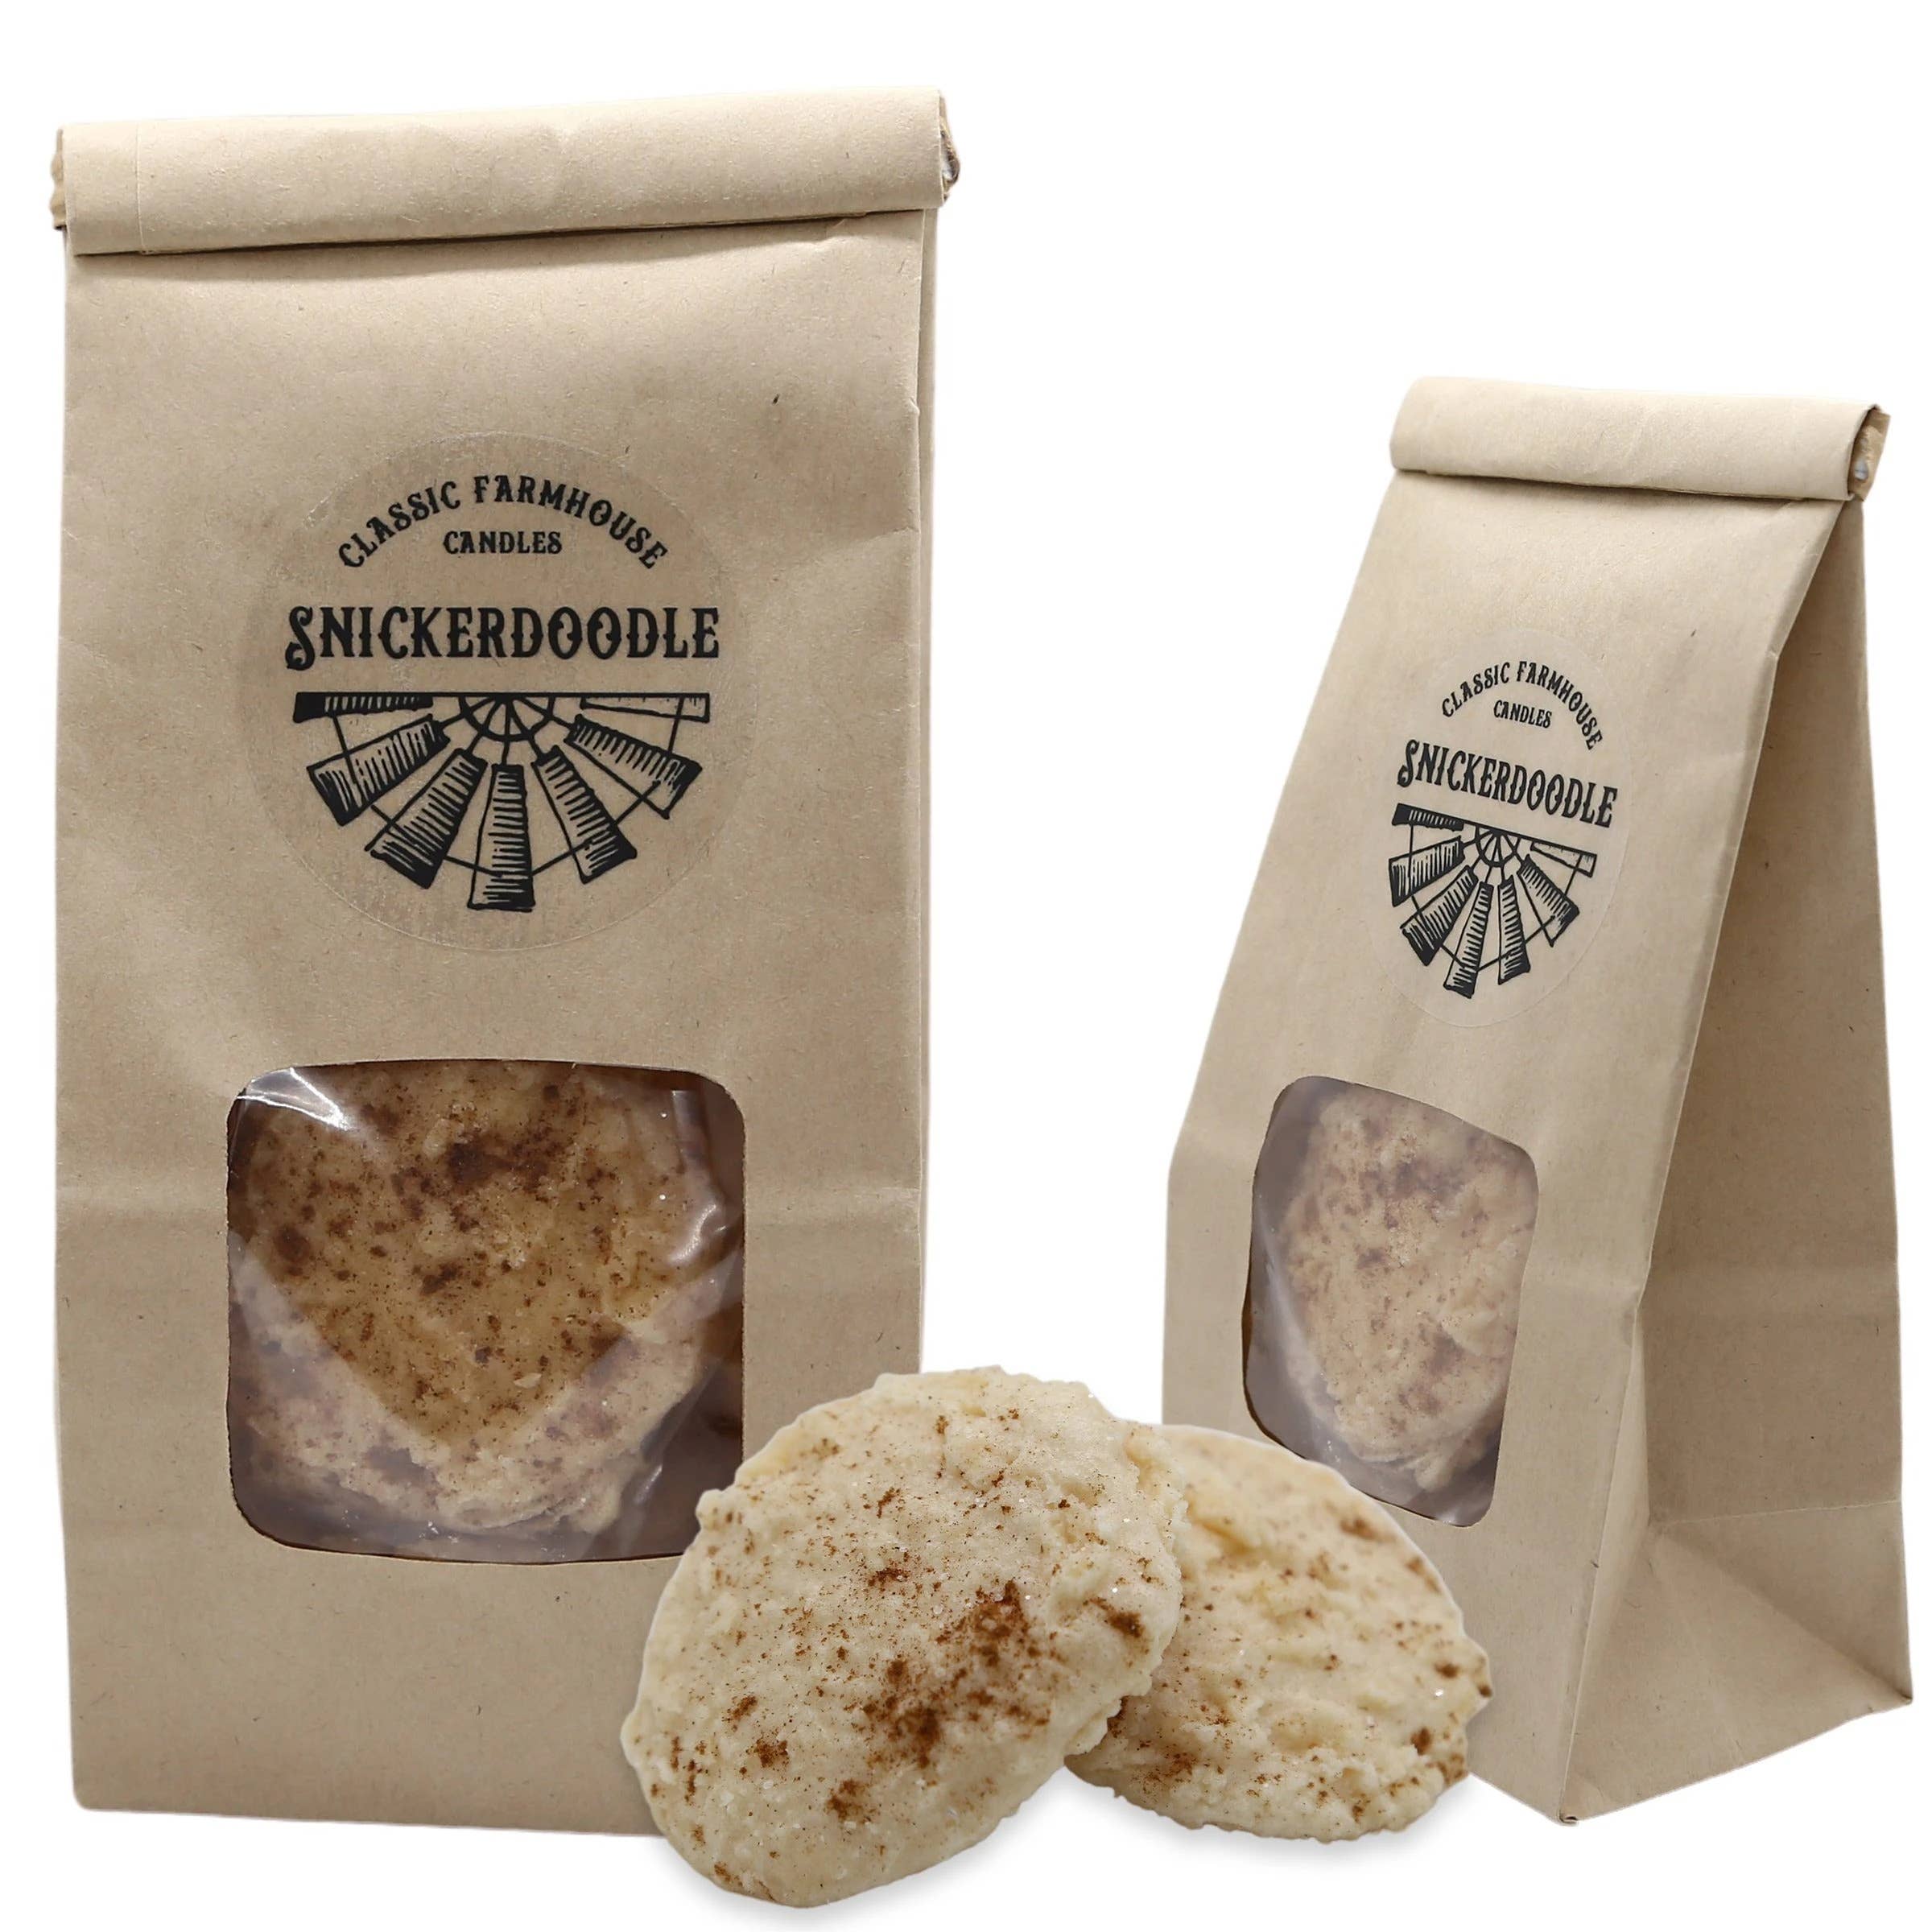 SNICKERDOODLE Snacks - Classic Farmhouse Candle